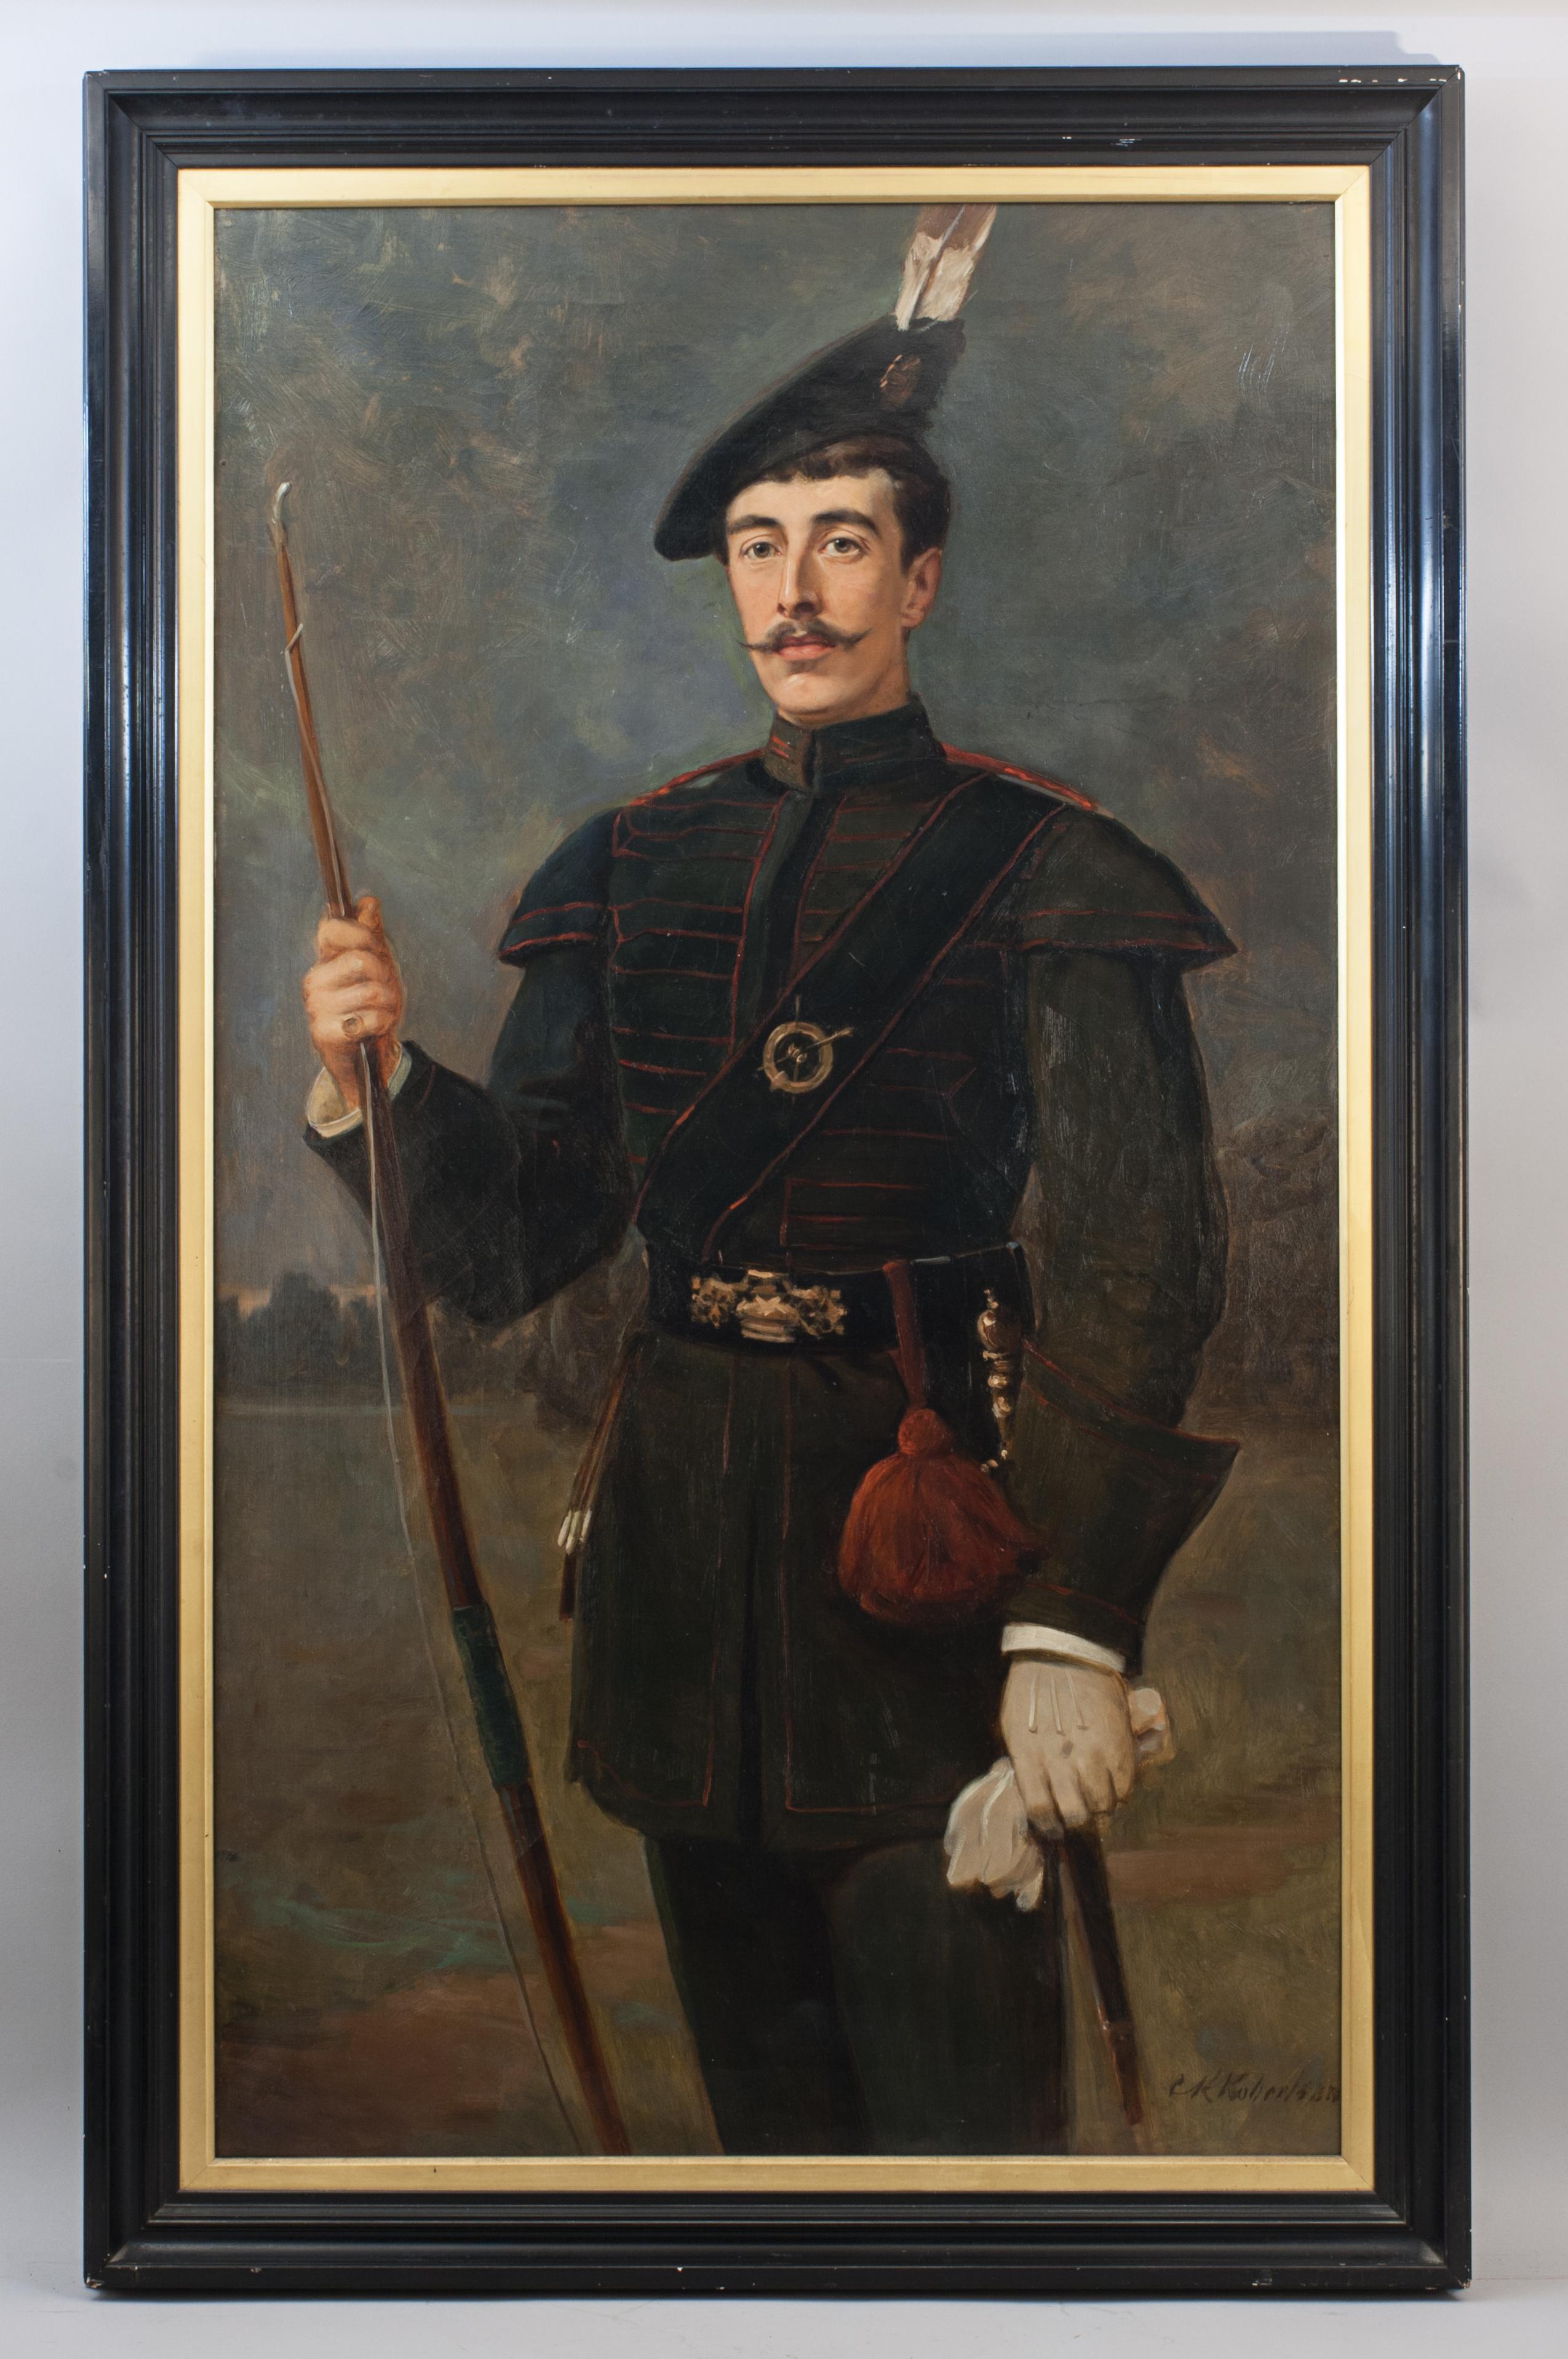 Oil on canvas of an Archer with Long Bow.
An impressive, large framed portrait of a member of 'The Royal Company Of Archers' by the Scottish painter Charles Kay Robertson (1860 - 1939). The oil is signed in the bottom right-hand corner, C K